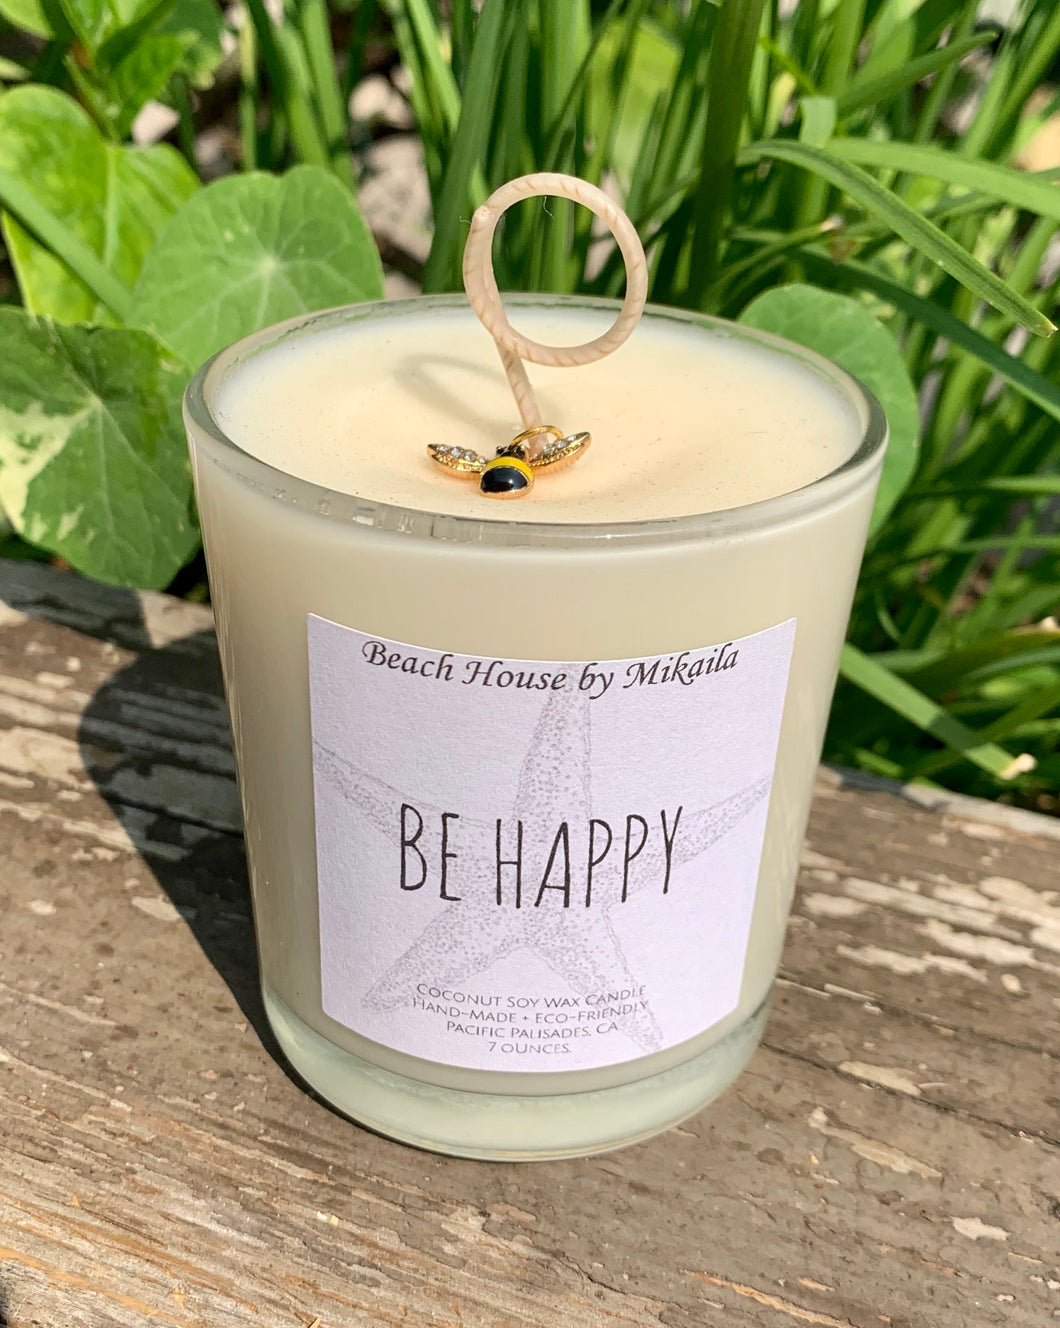 HANDMADE SOY/COCONUT SCENTED CANDLE | FIERCE | BEL CANDLE & SCENTS